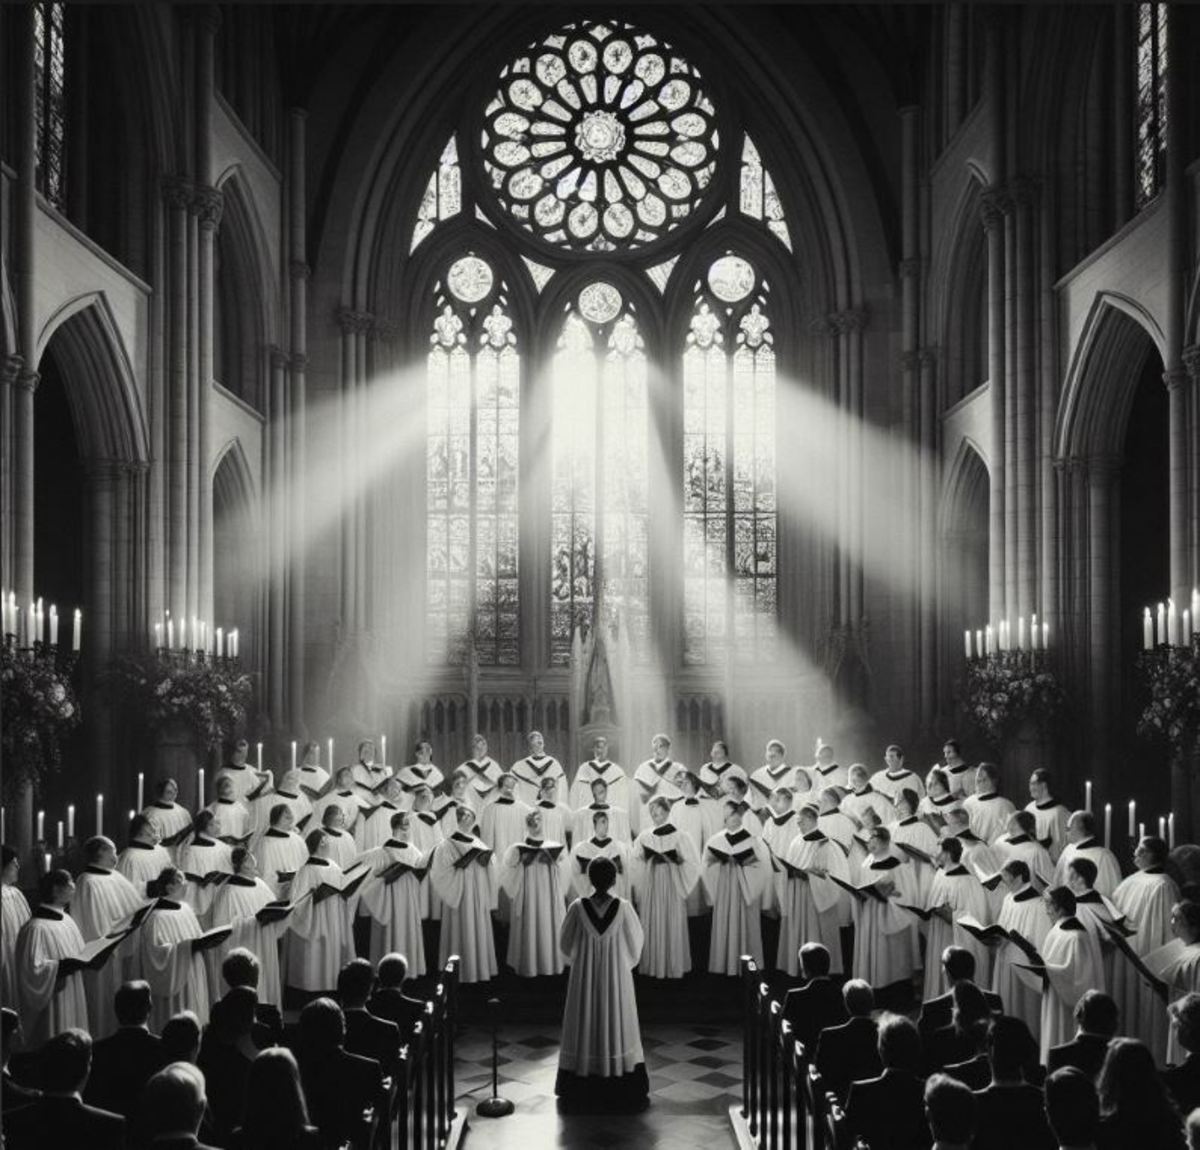 How Great Thou Art - The Amazing History of the Hymn